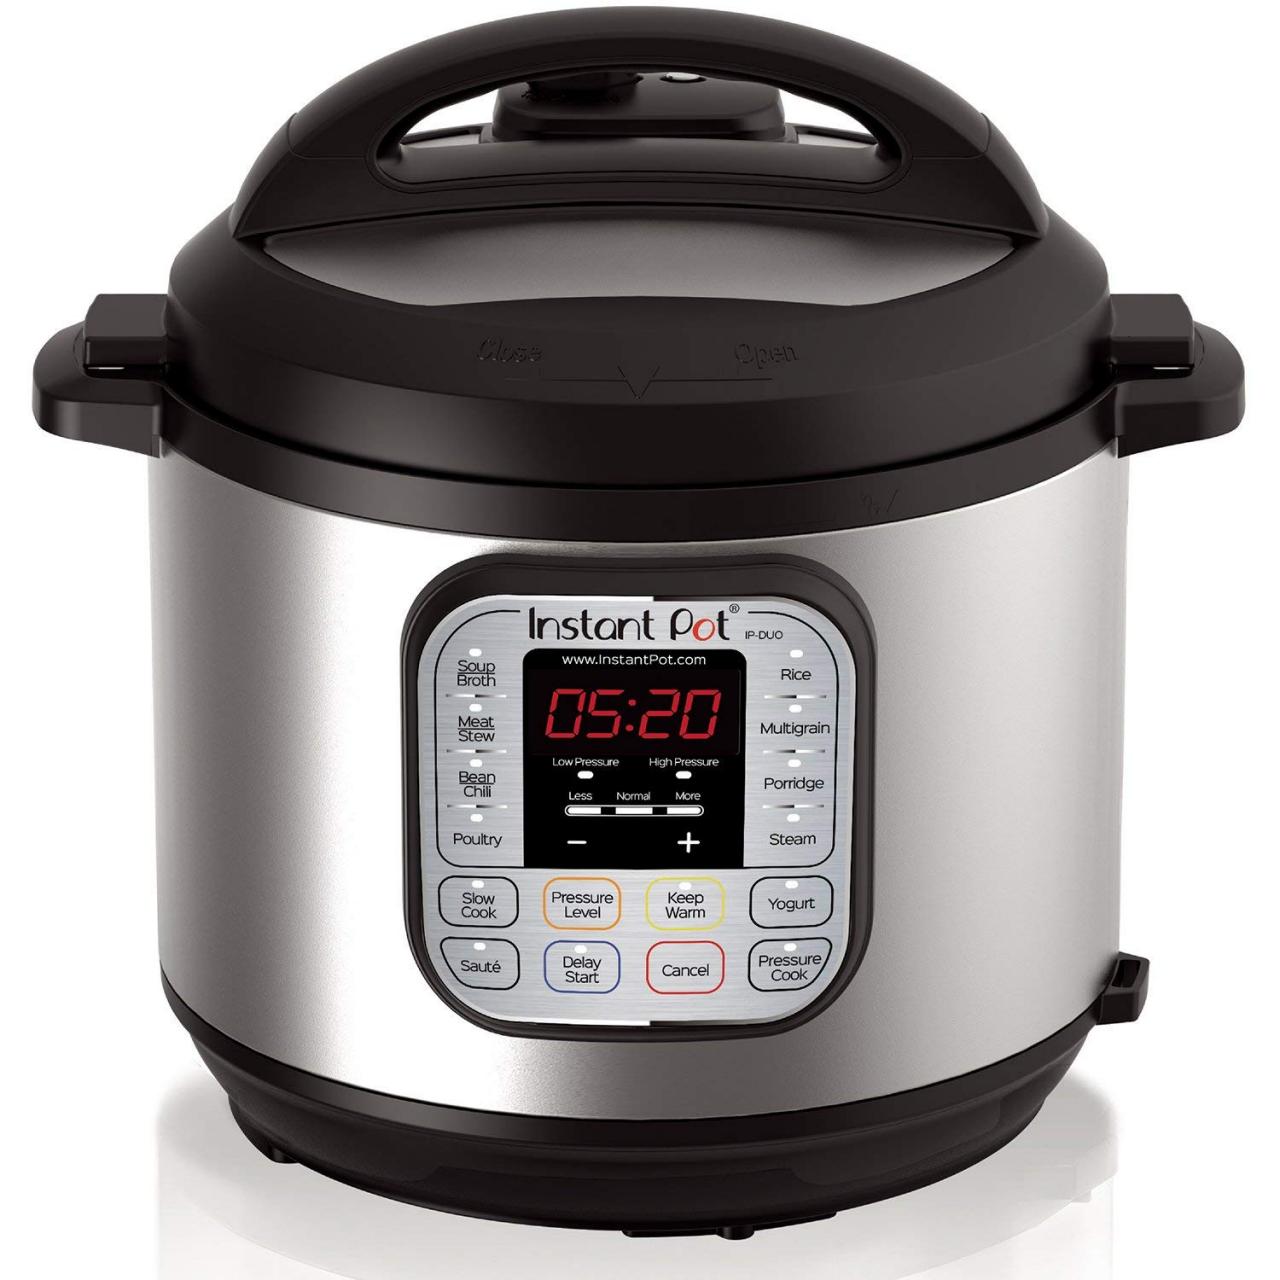 https://food.fnr.sndimg.com/content/dam/images/food/products/2019/7/18/rx_instant-pot-duo60-6-qt-7-in-1-multi-use-programmable-pressure-cooker.jpeg.rend.hgtvcom.1280.1280.suffix/1563463804811.jpeg